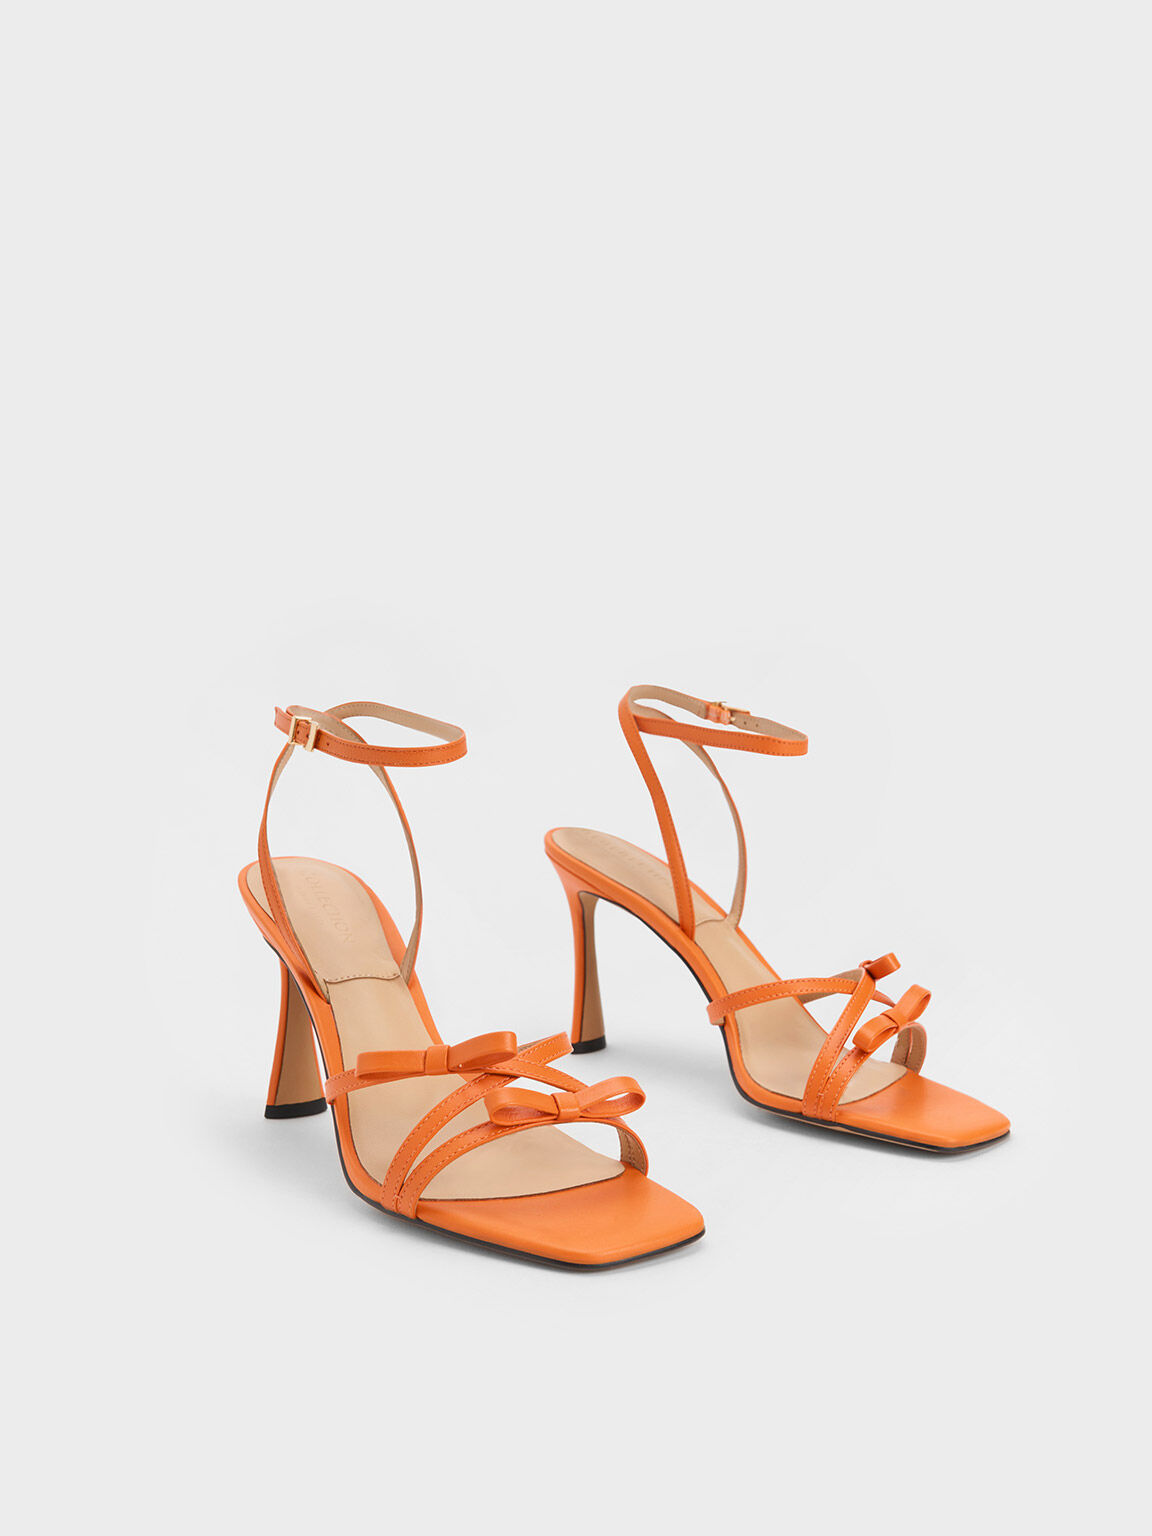 Leather Bow Strappy Sandals, Orange, hi-res